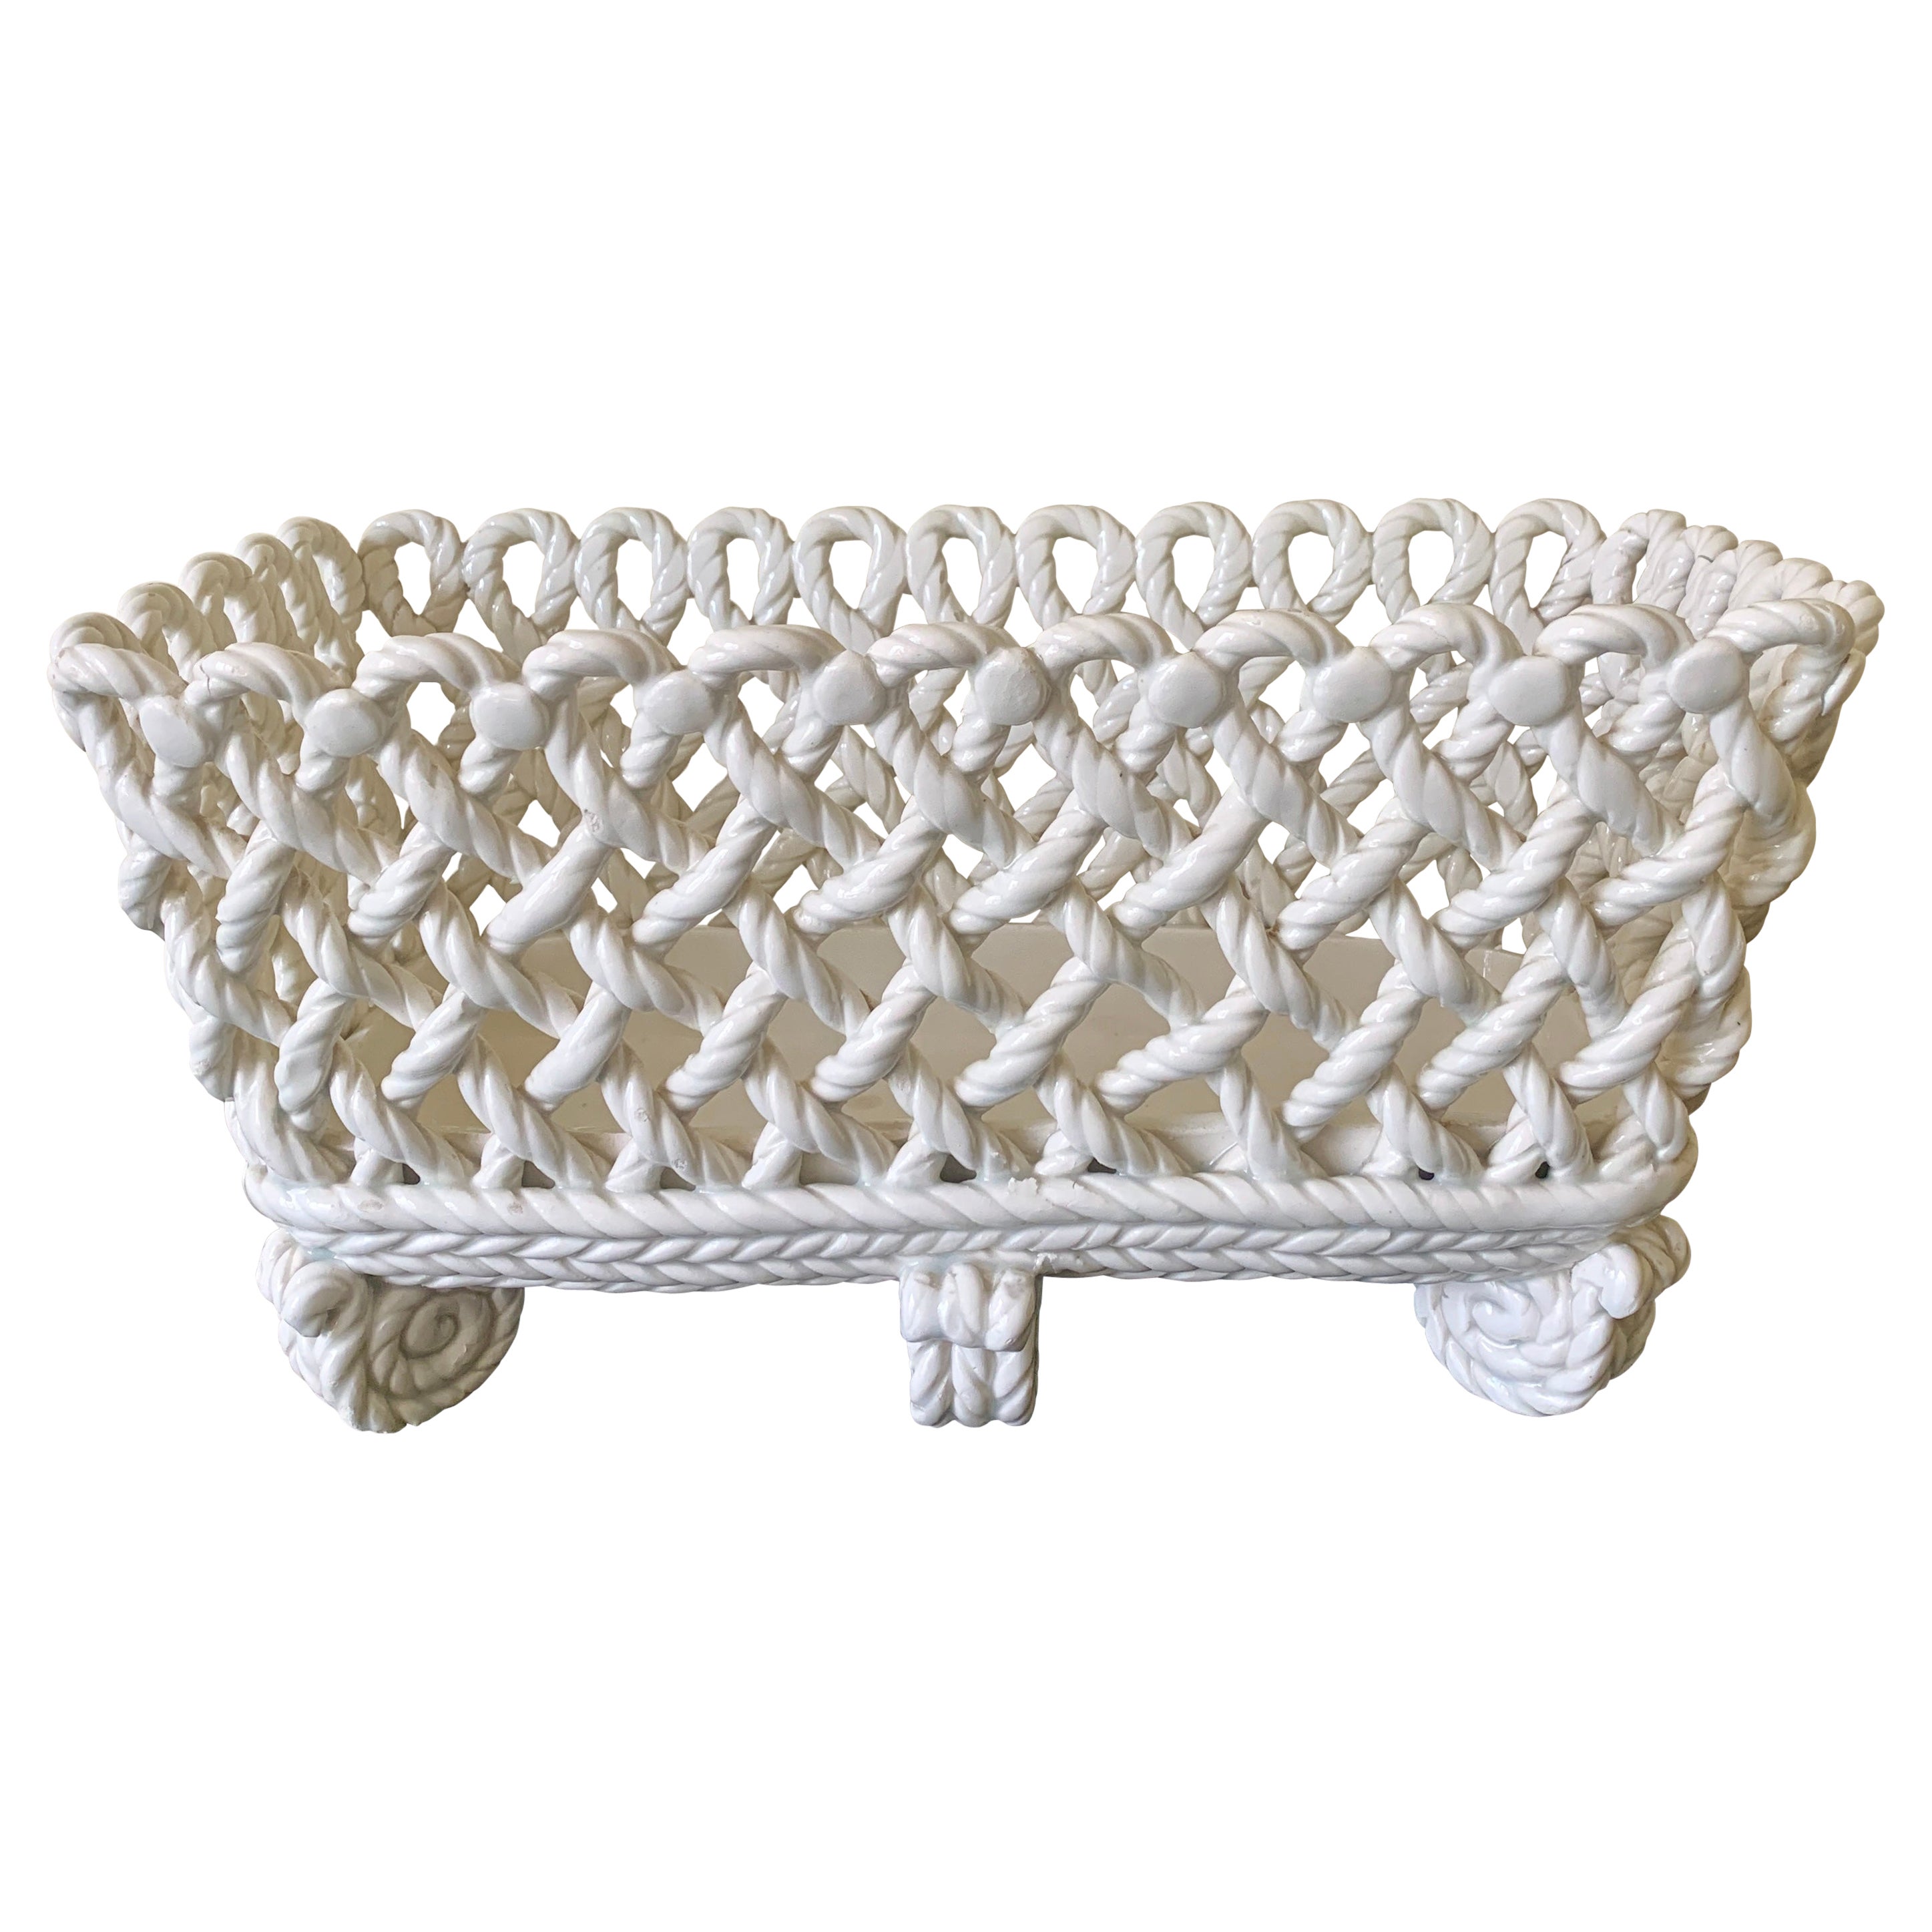 French Country White Ceramic Woven Rope Cachepot Basket